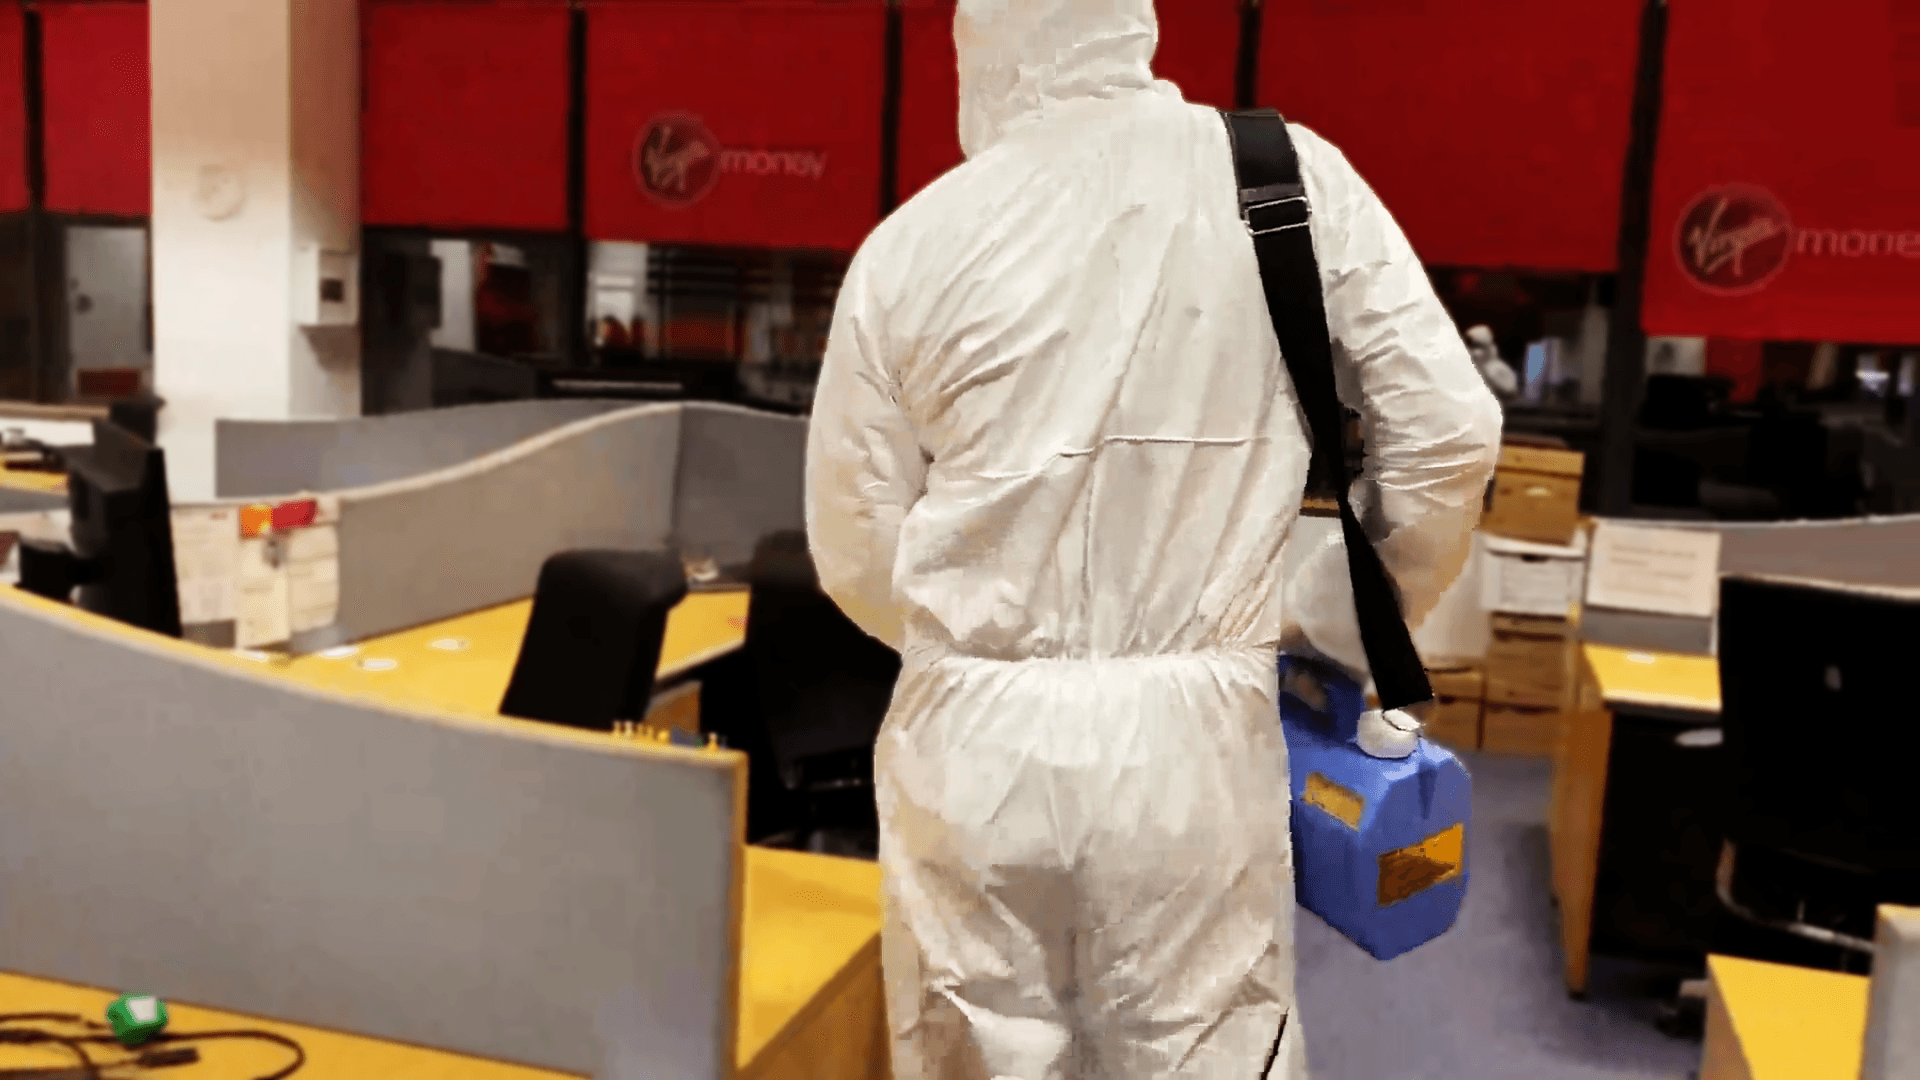 A employee wearing protective gear disinfecting an office area